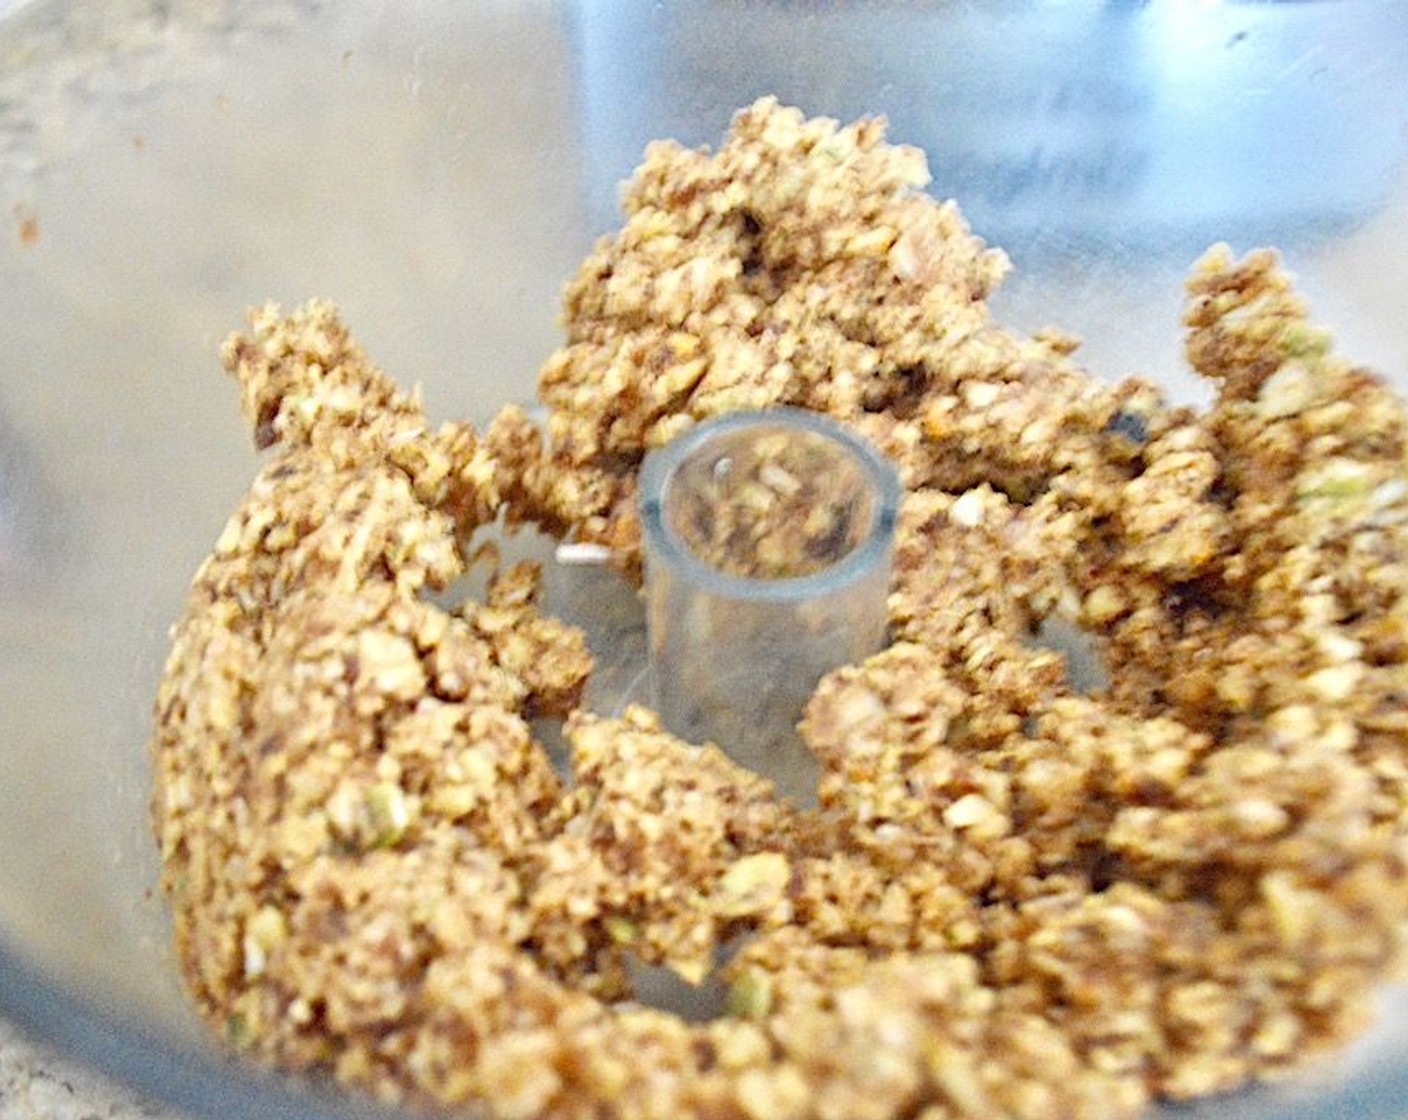 step 2 Into a food processor, add the sweet potato, Pitted Dates (12), Walnut (1 cup), Slivered Almonds (1 cup), Pepitas (1/4 cup), Unsweetened Shredded Coconut (1/4 cup), Ground Flaxseed (1 tsp), Ground Cinnamon (1 tsp), Ground Nutmeg (1/2 tsp), and Vanilla Extract (1/2 tsp). Pulse it together until you have a mixture that is fine but still has some texture.